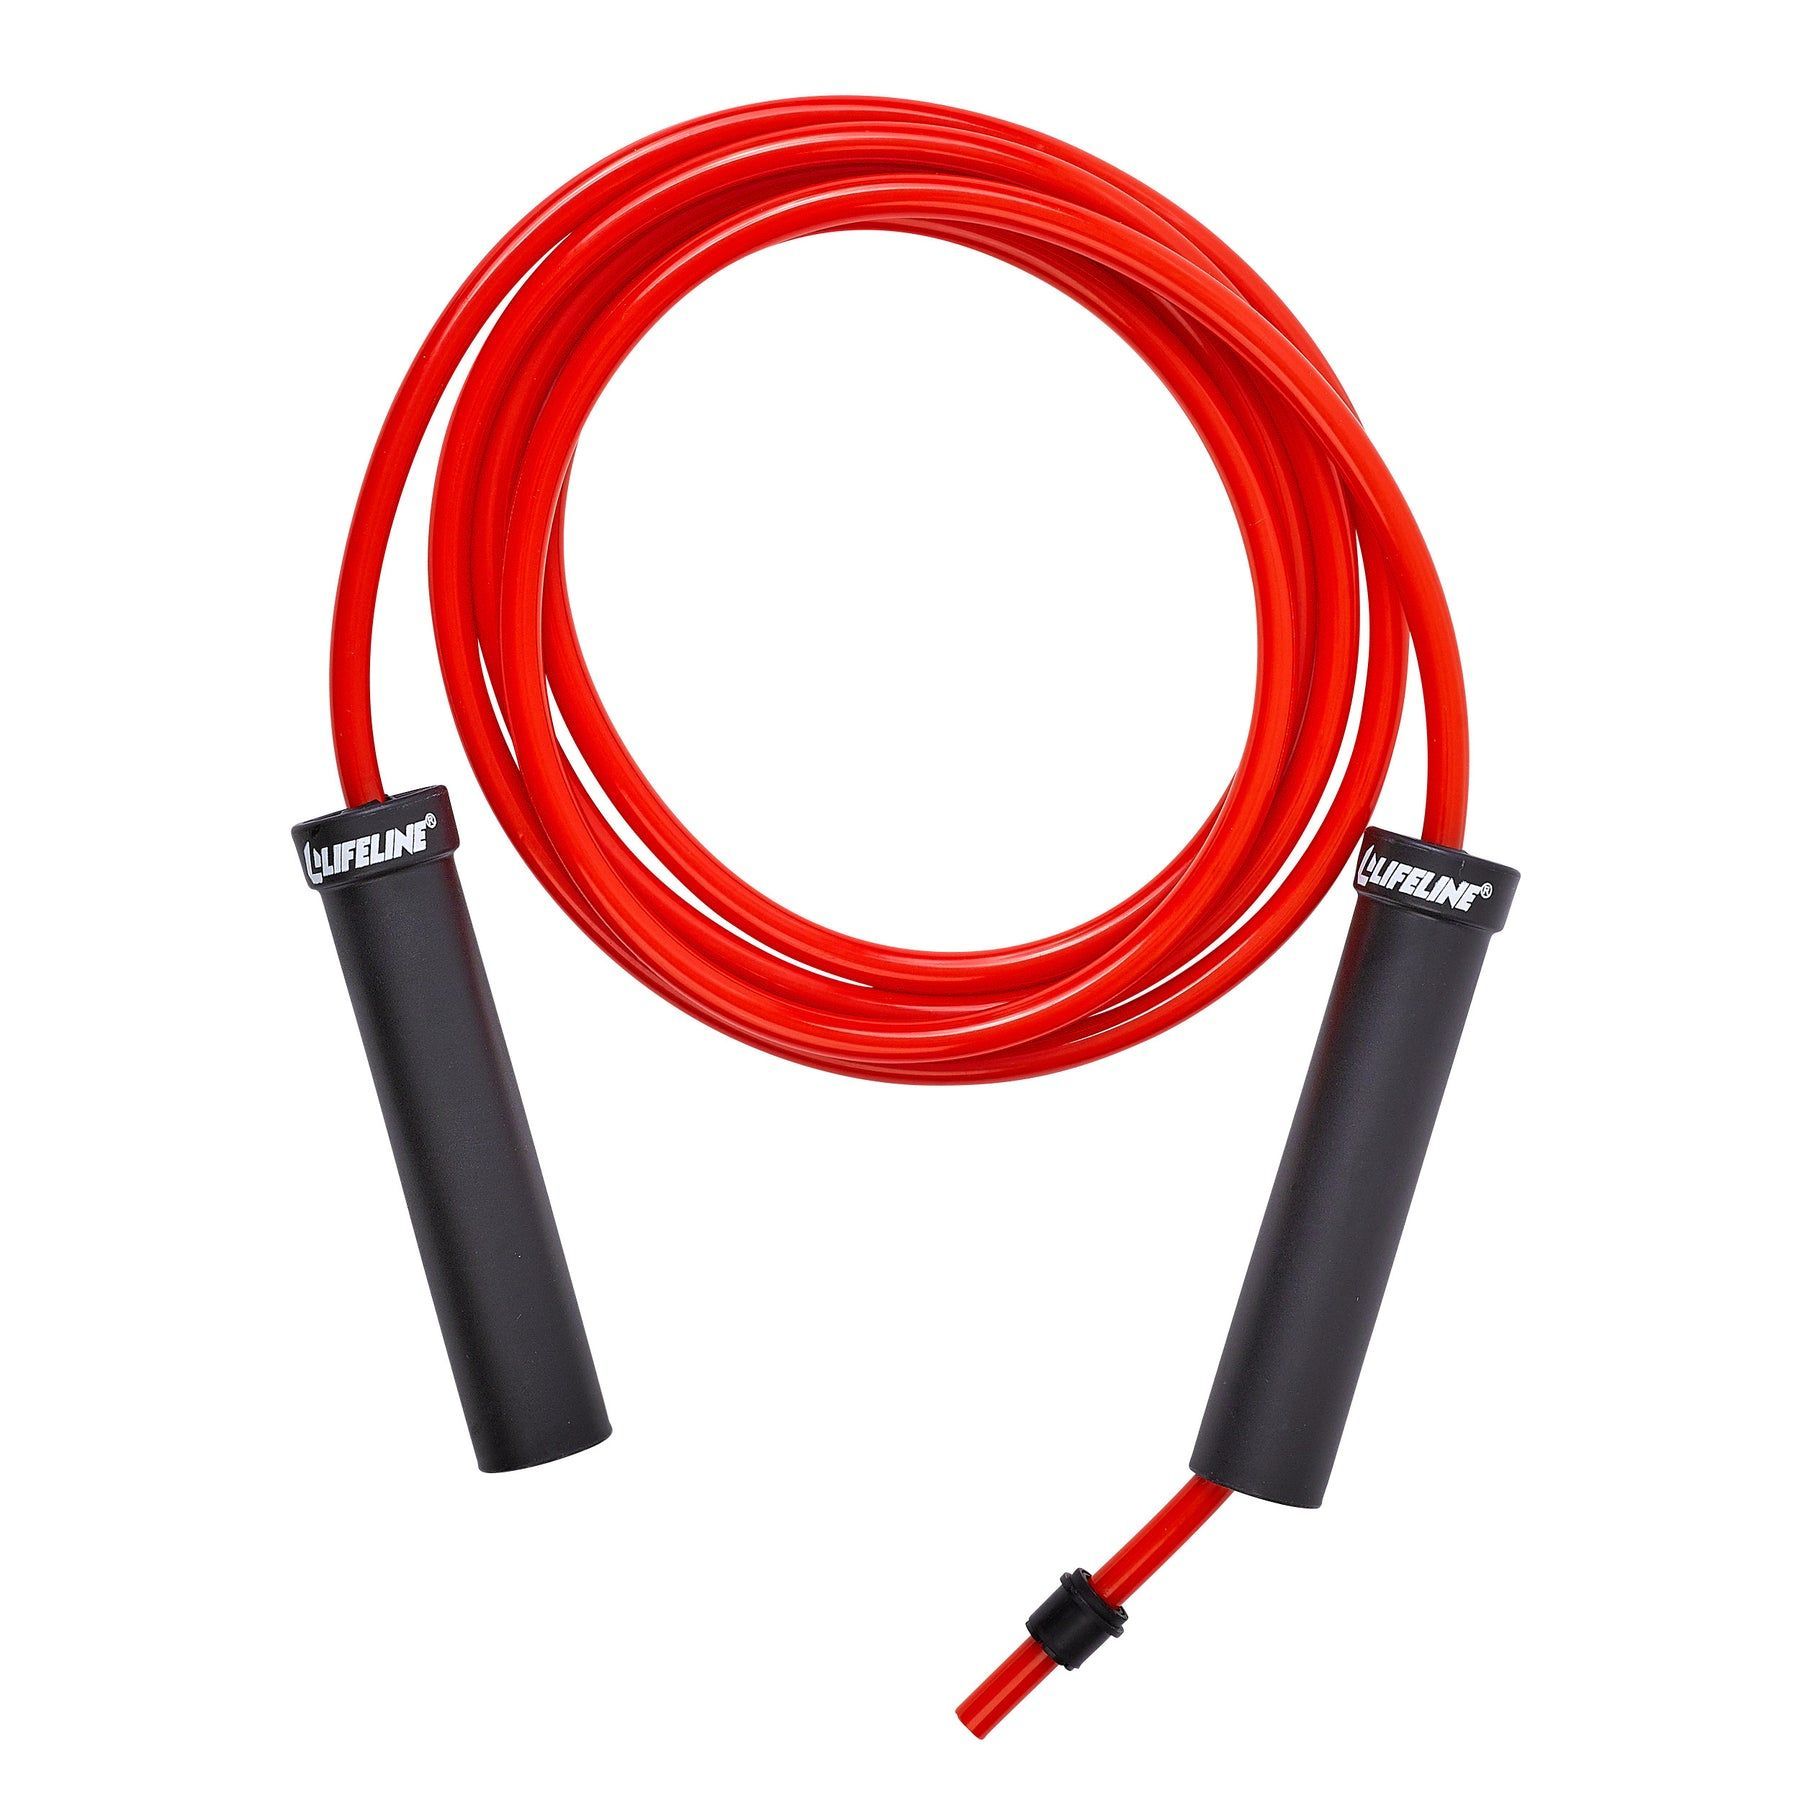 Details about   Jump Rope Speed Skipping Crossfit Workout Gym Aerobic Exercise Boxing Red 